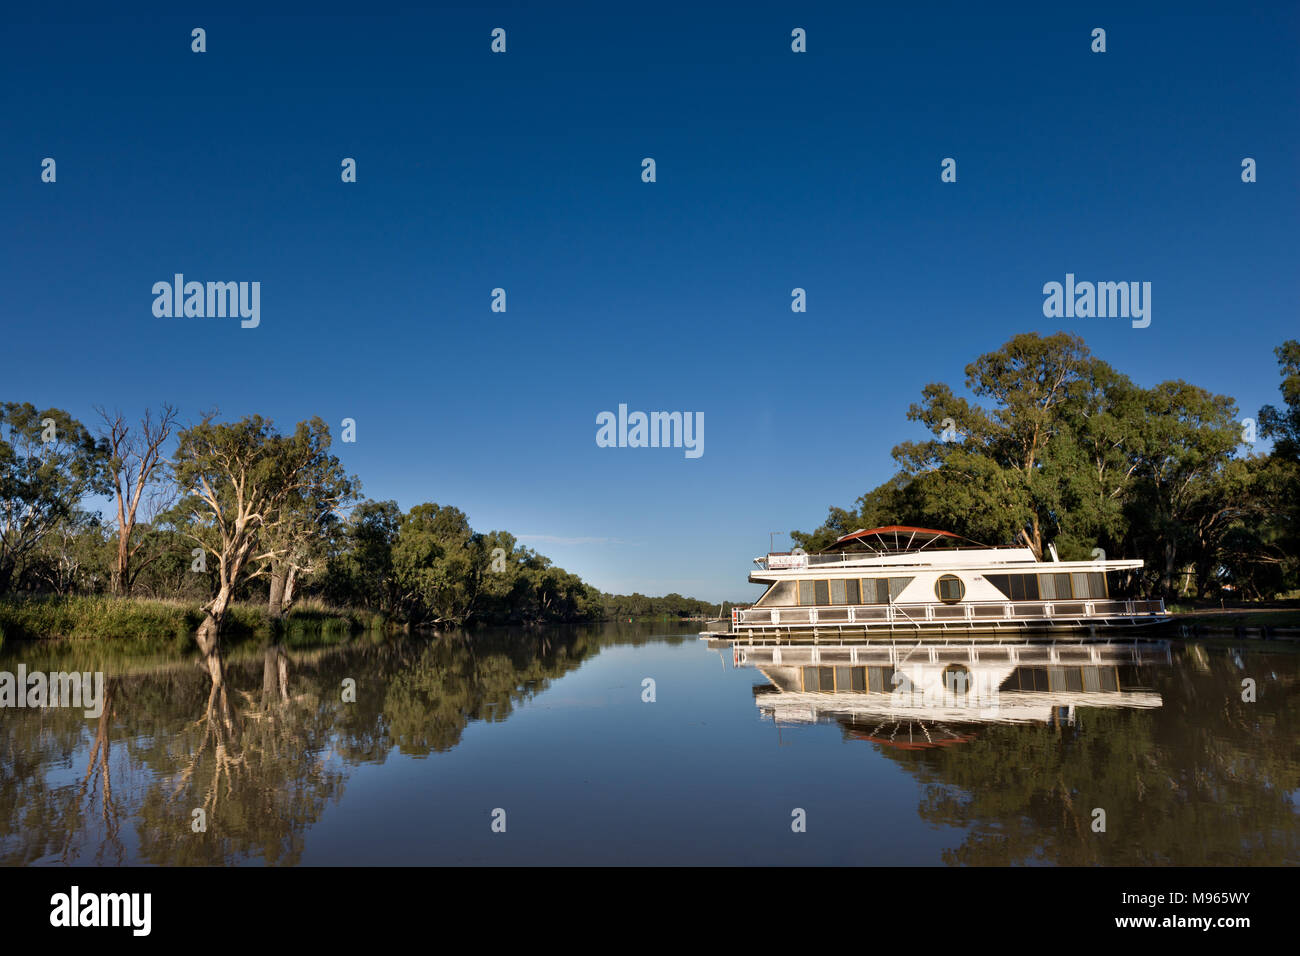 Houseboat moored just upstream from the junction of the Murray and Darling River at Wentworth. The boat is in the Darling River but in the background Stock Photo